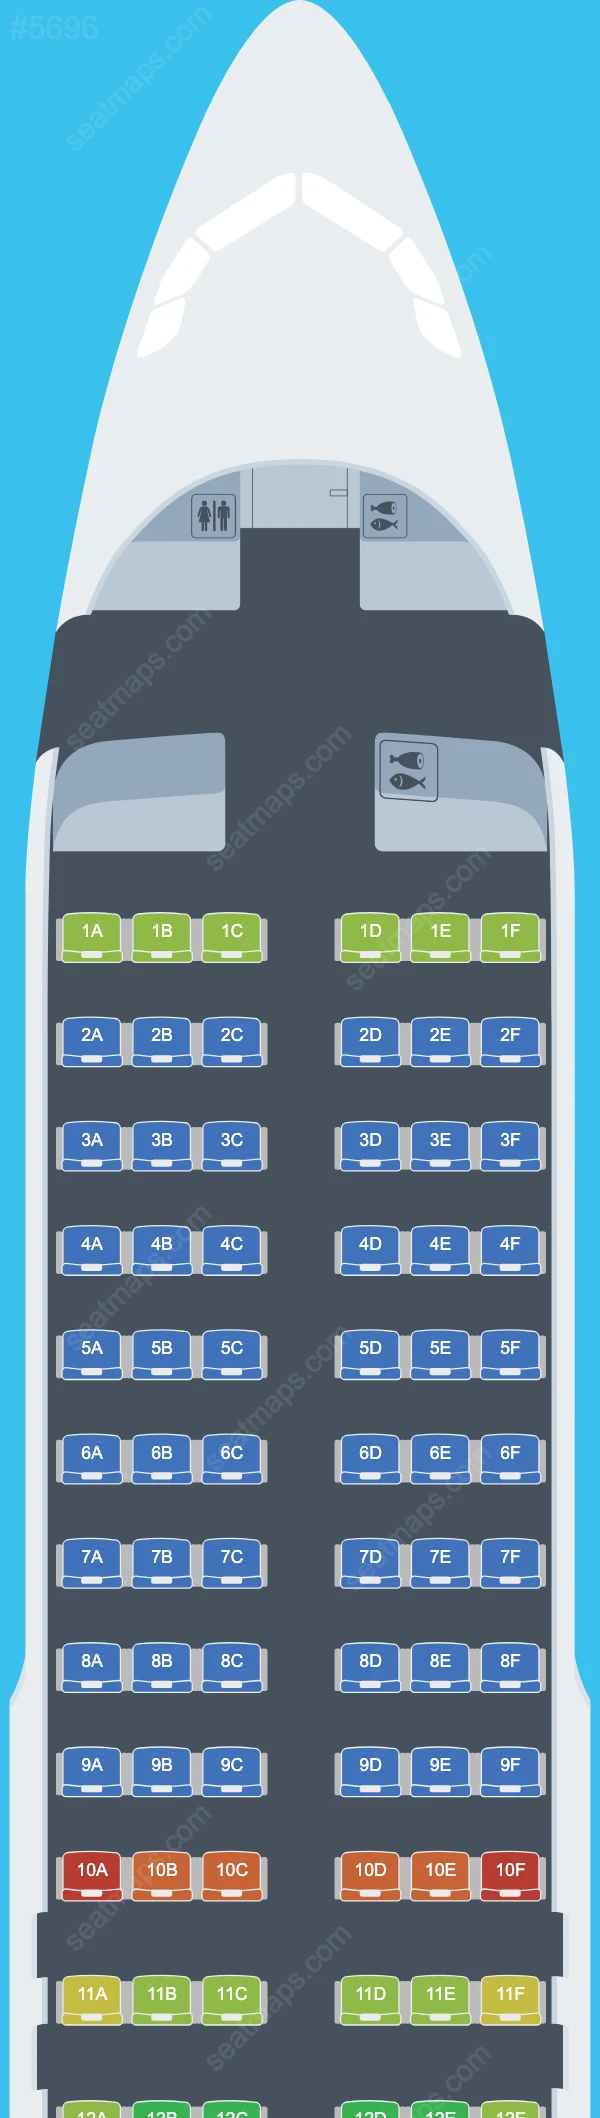 Brussels Airlines Airbus A320-200 seatmap mobile preview